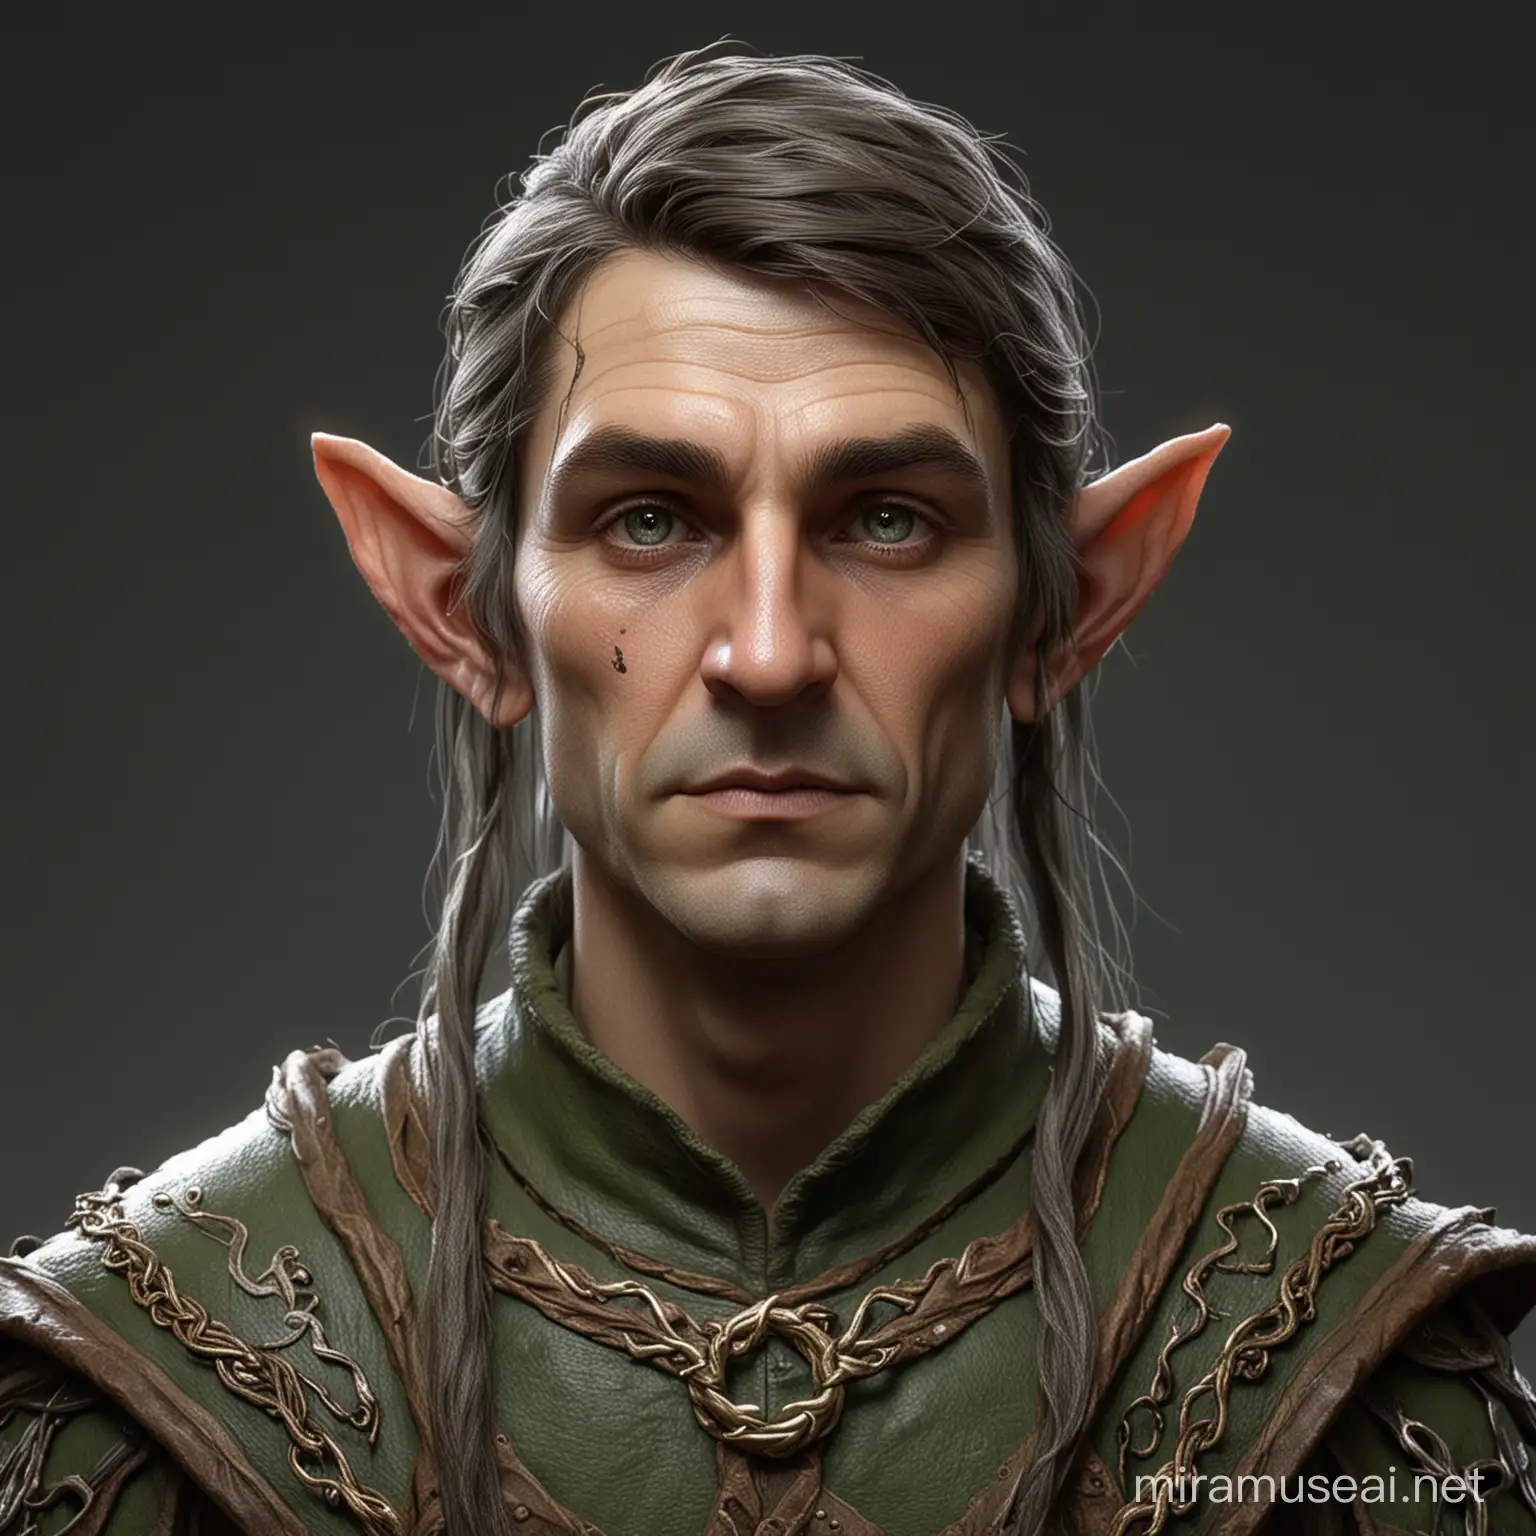 Male elf aged 300 years old with all elements around him.